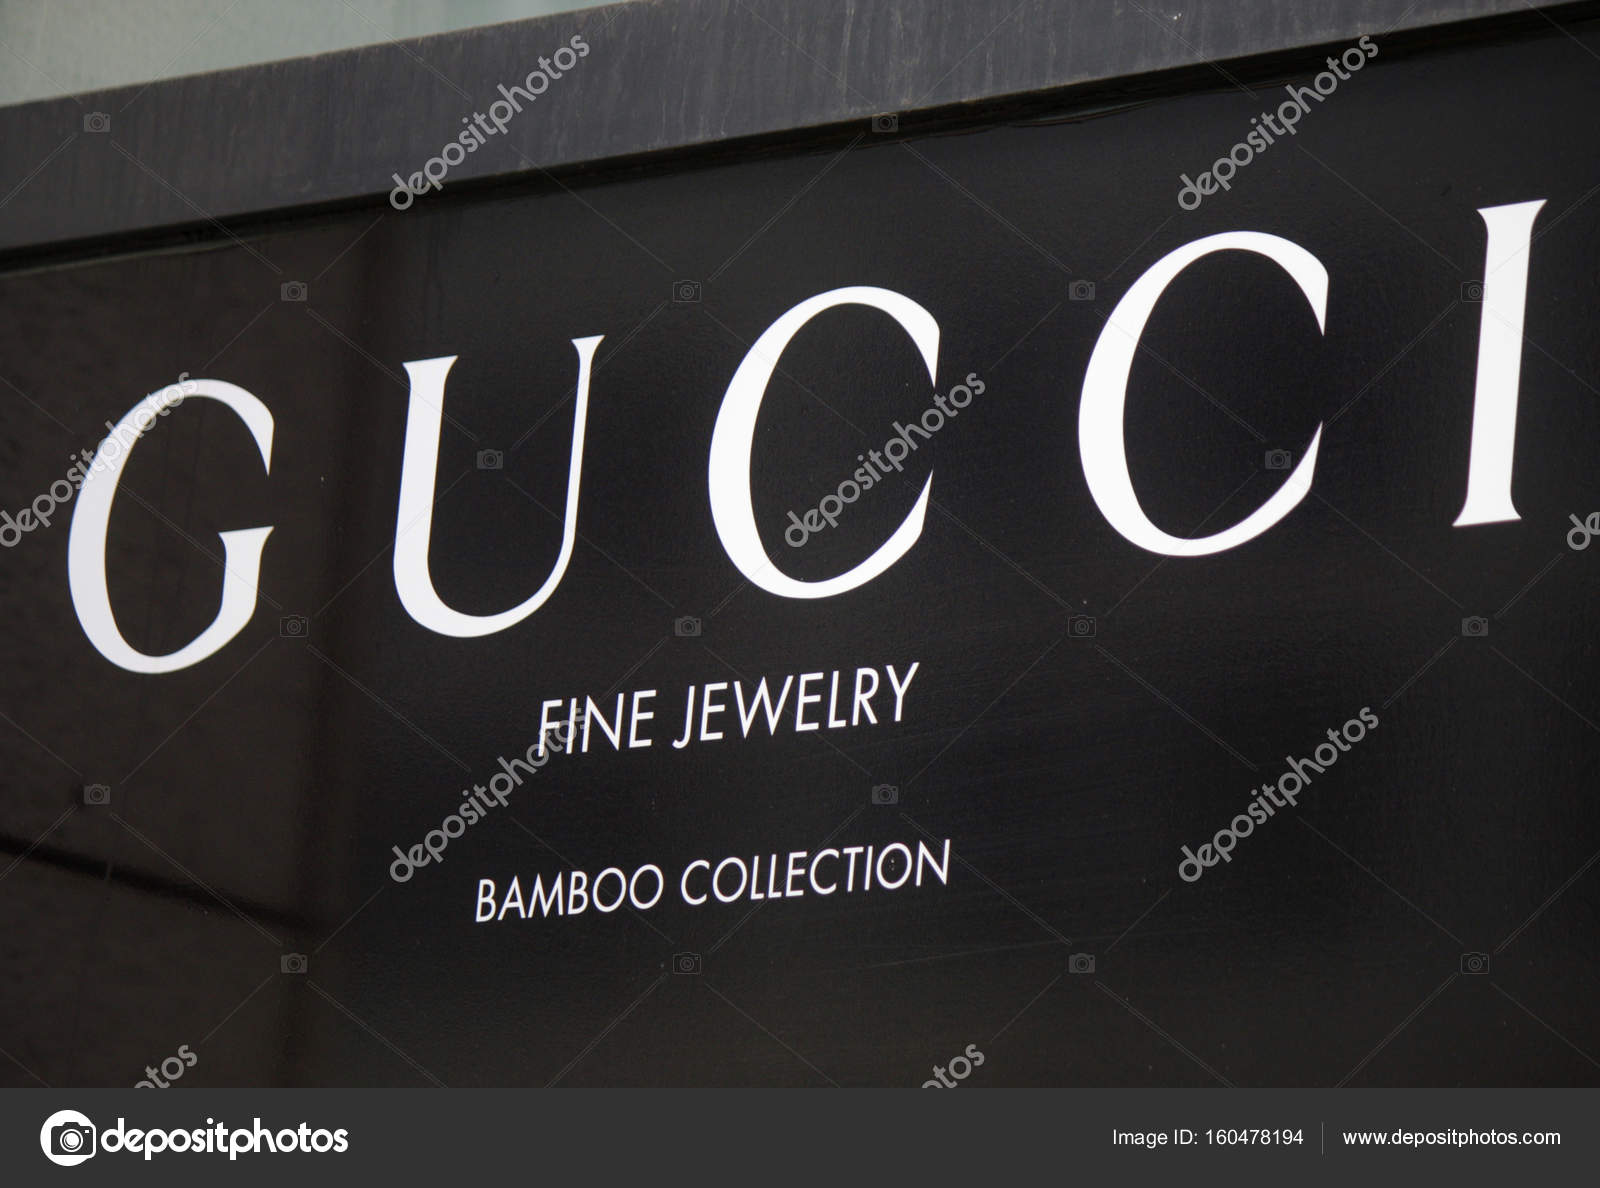 of brand "Gucci" – Stock Editorial Photo © 360ber